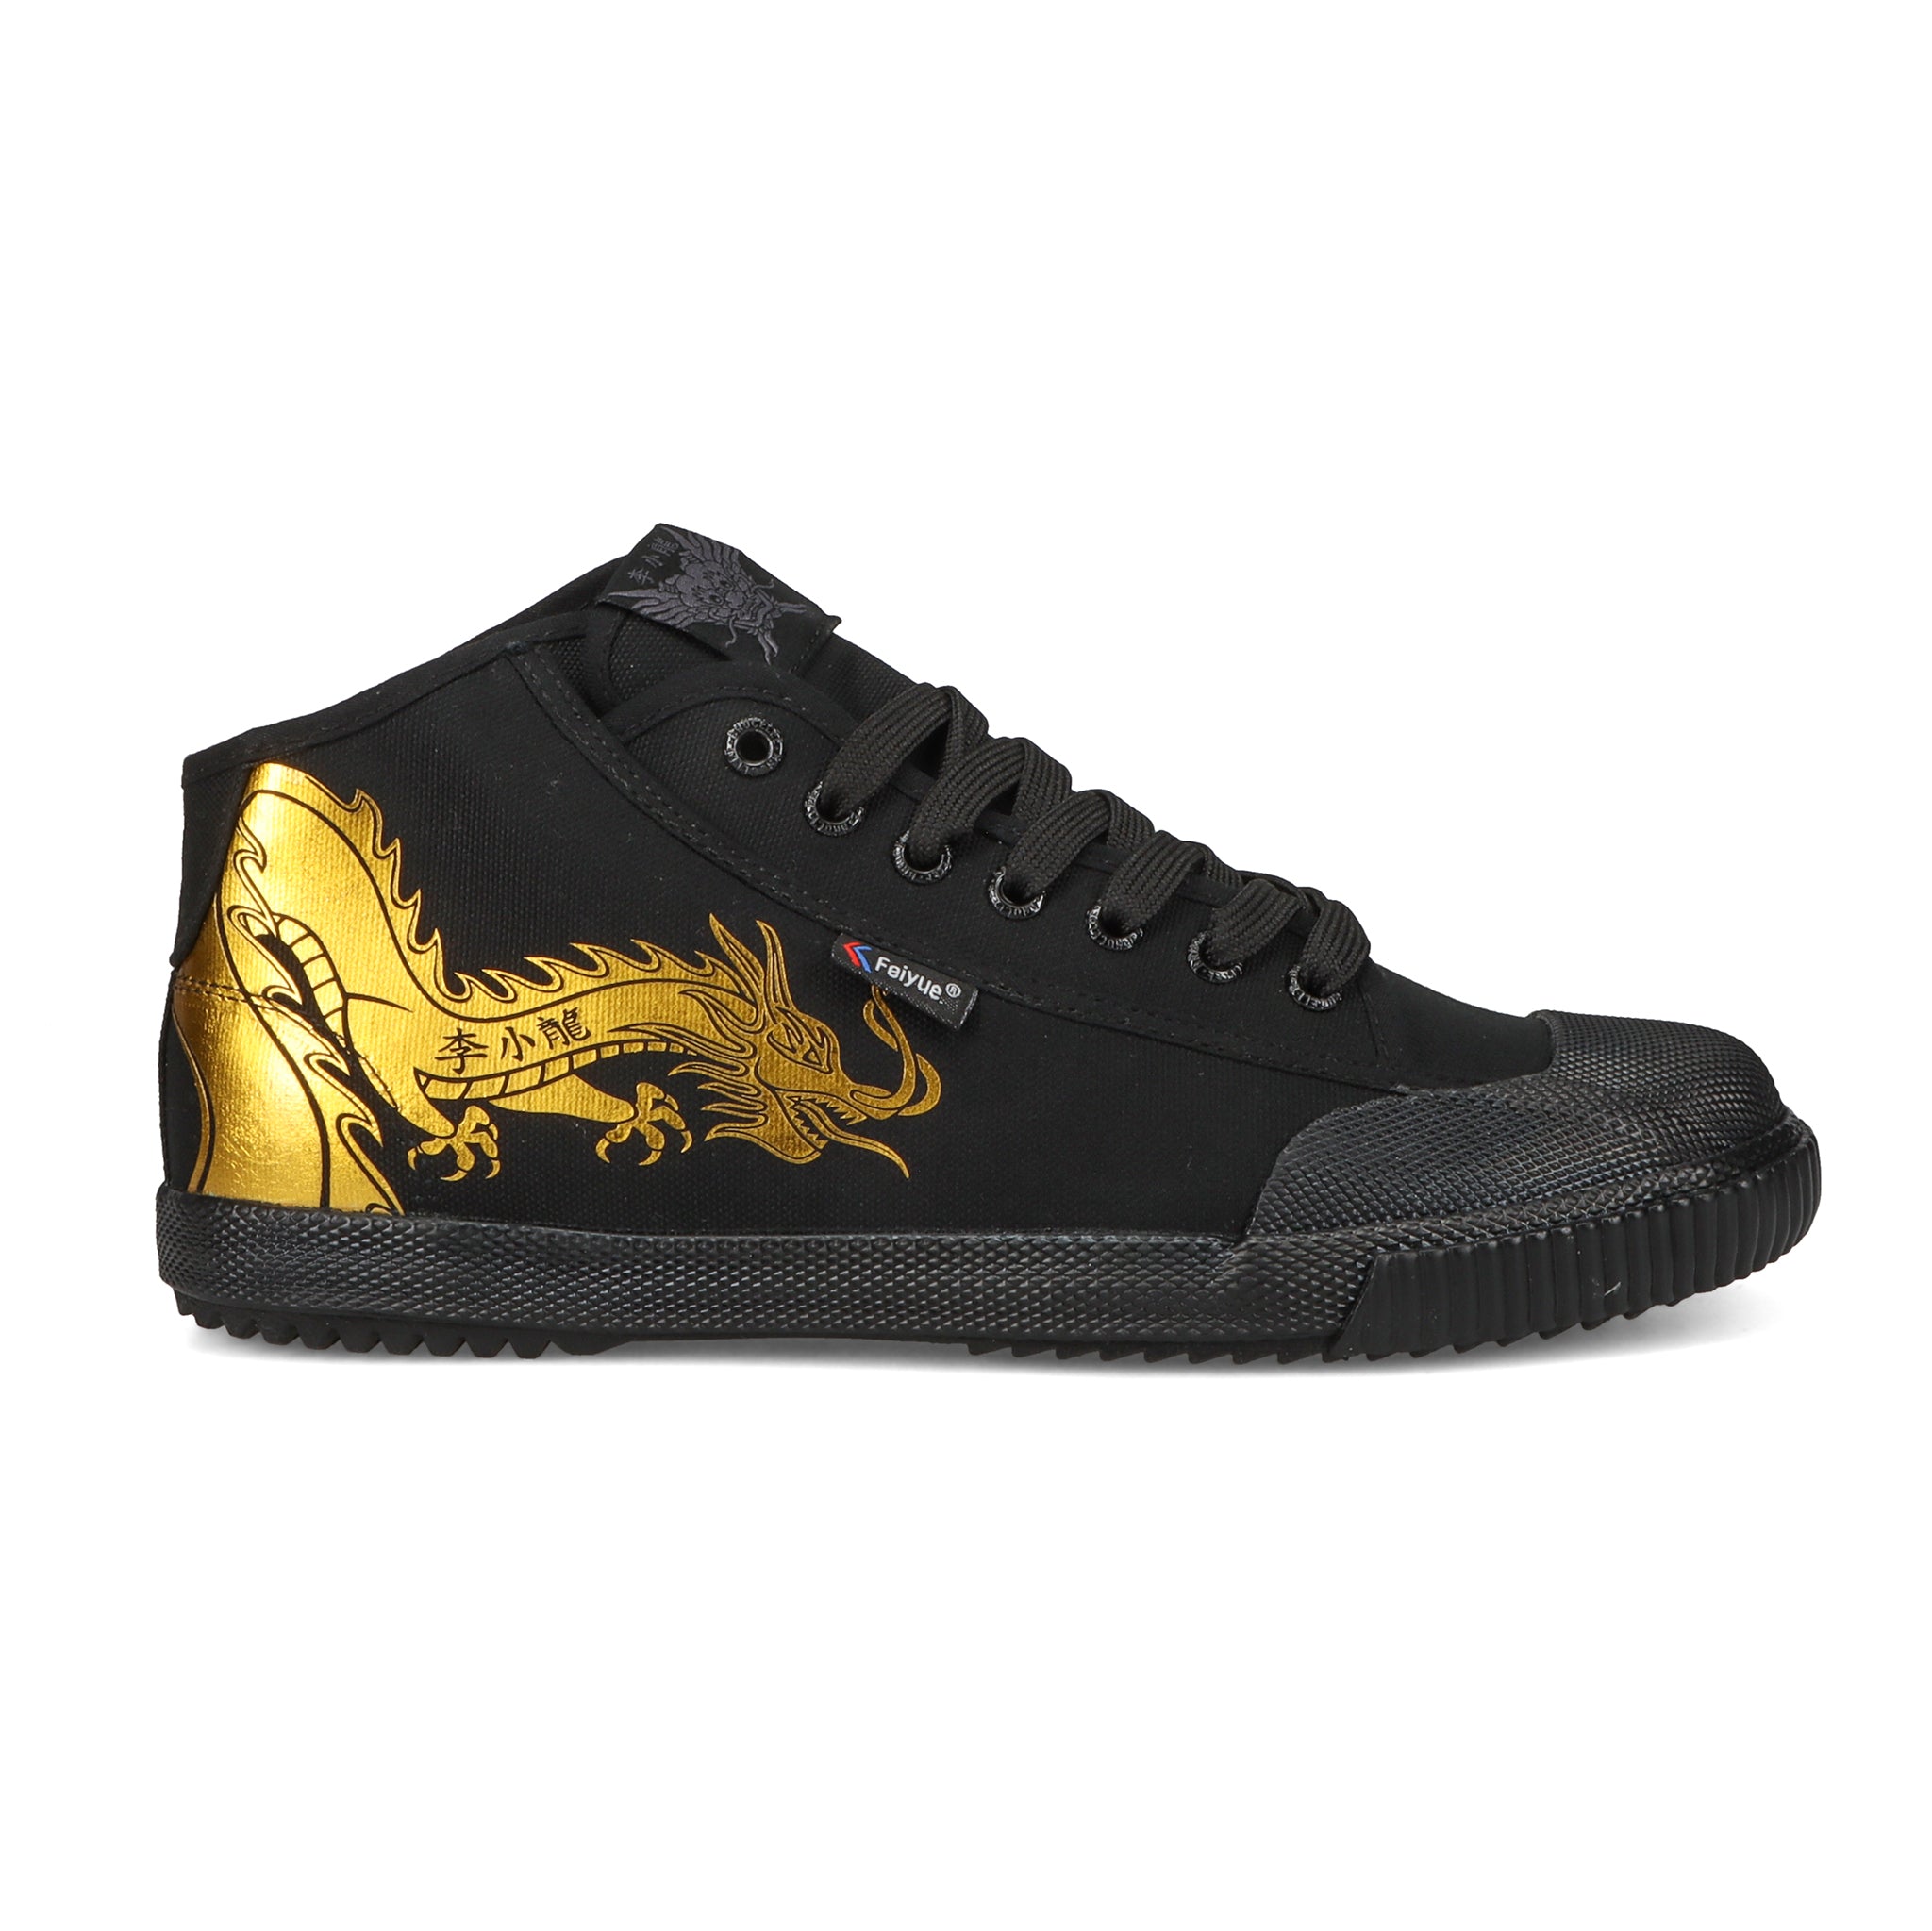 Feiyue x Bruce Lee 1920 Martial Arts Shoes, Unisex Mid and Low Top Sneakers for Martial Arts, Parkour, Lifting, and Great for Every Day Casual Wear